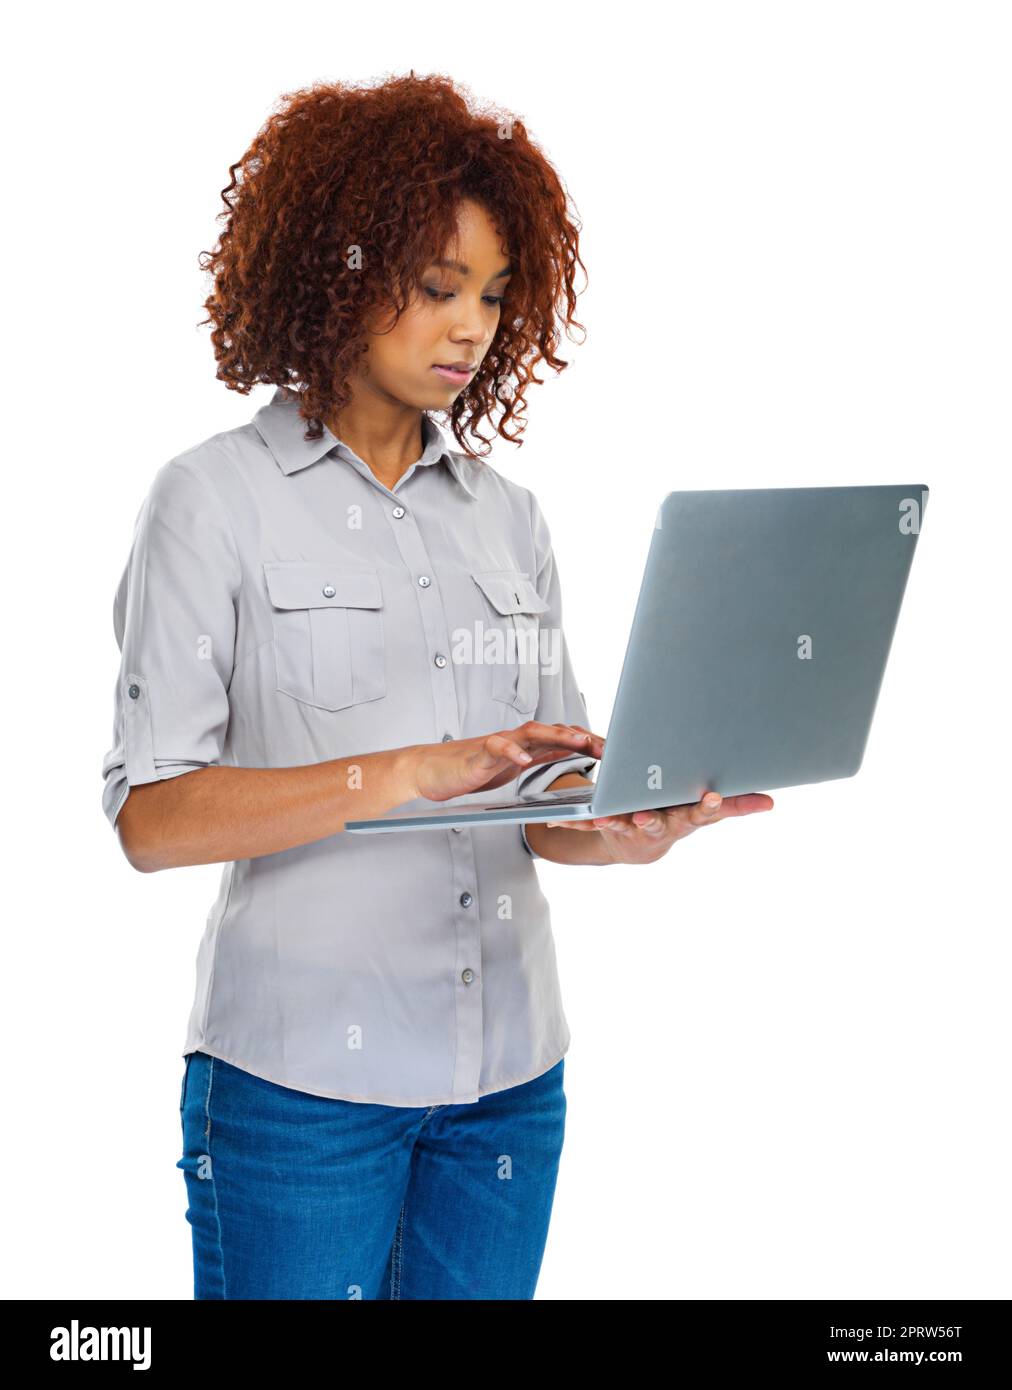 Modern life and technology. a young woman using a laptop isolated on white. Stock Photo